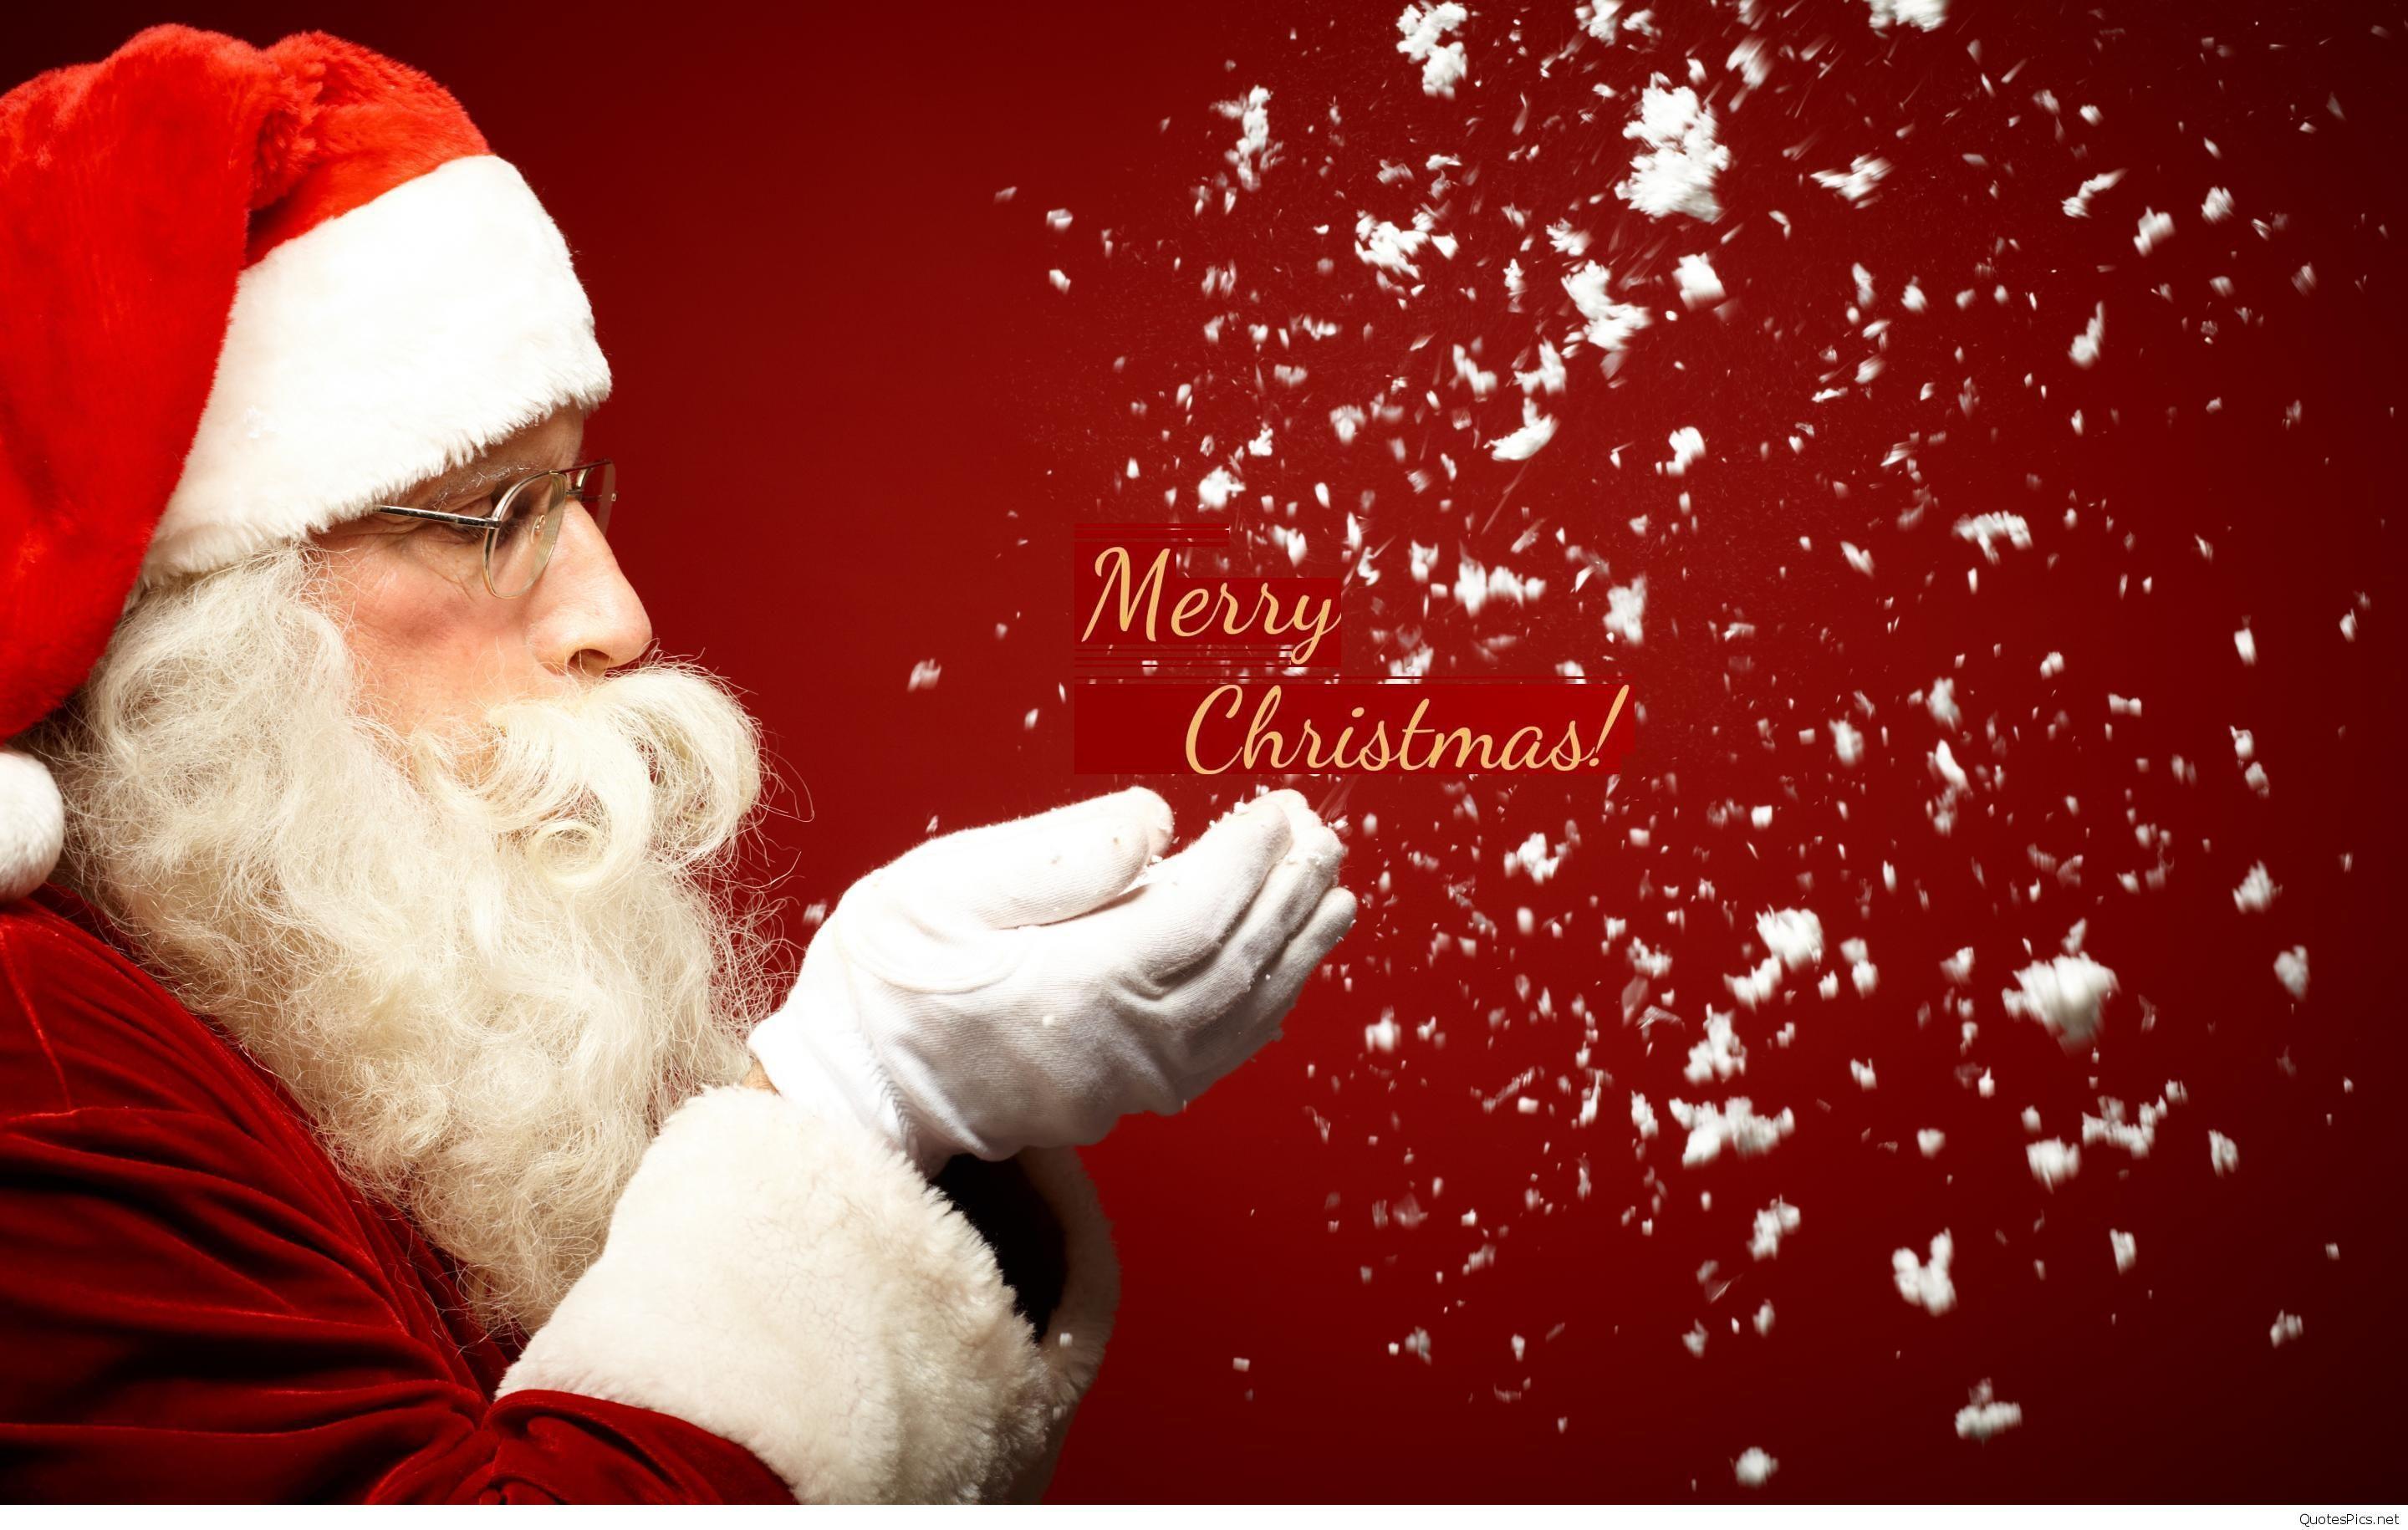 Merry Christmas Santa Claus Wallpapers, greetings cards 2016